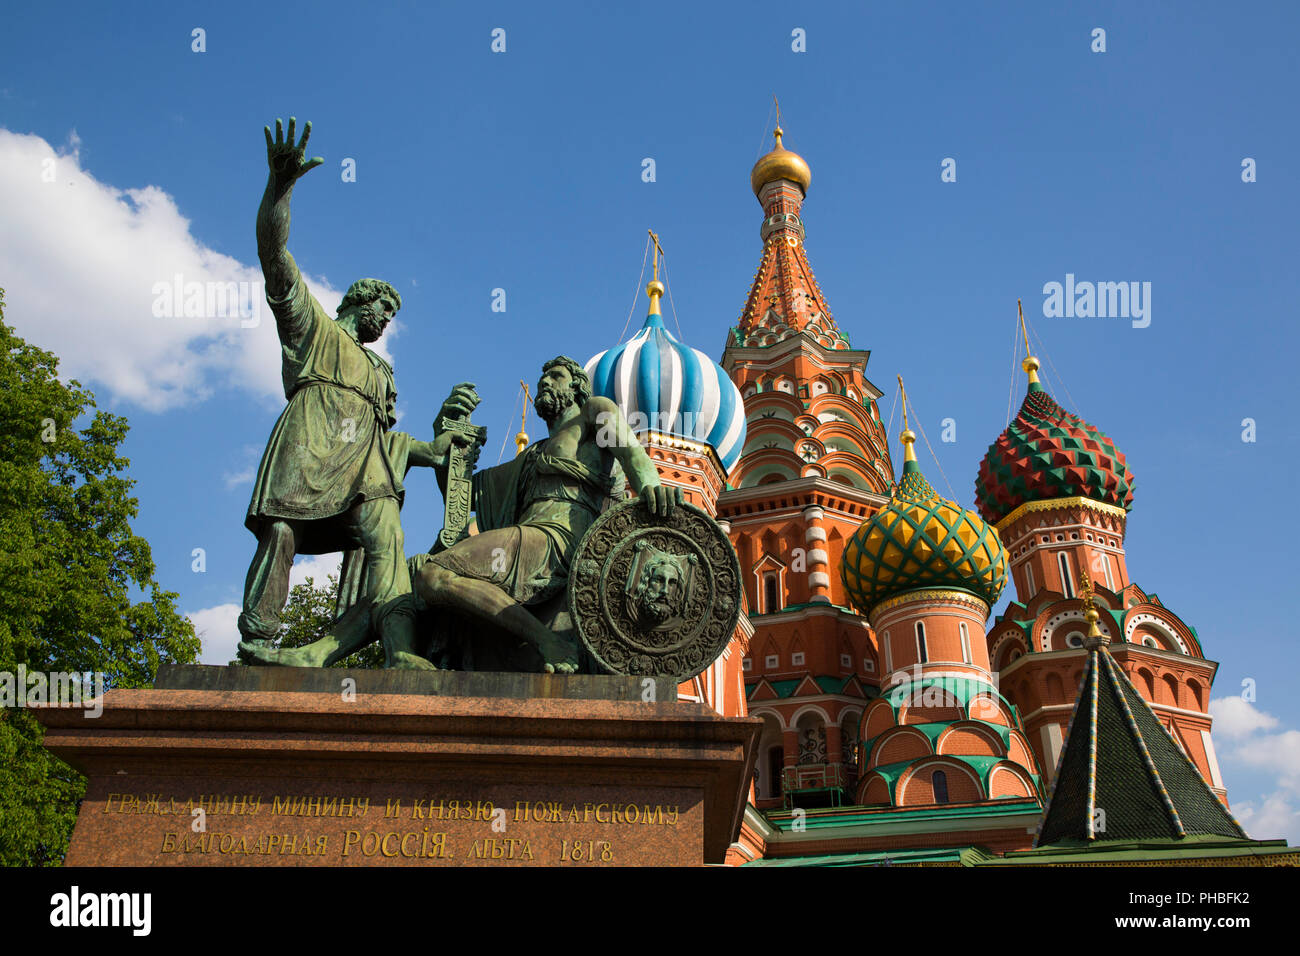 St. Basil's Cathedral, Red Square, UNESCO World Heritage Site, Moscow, Russia, Europe Stock Photo